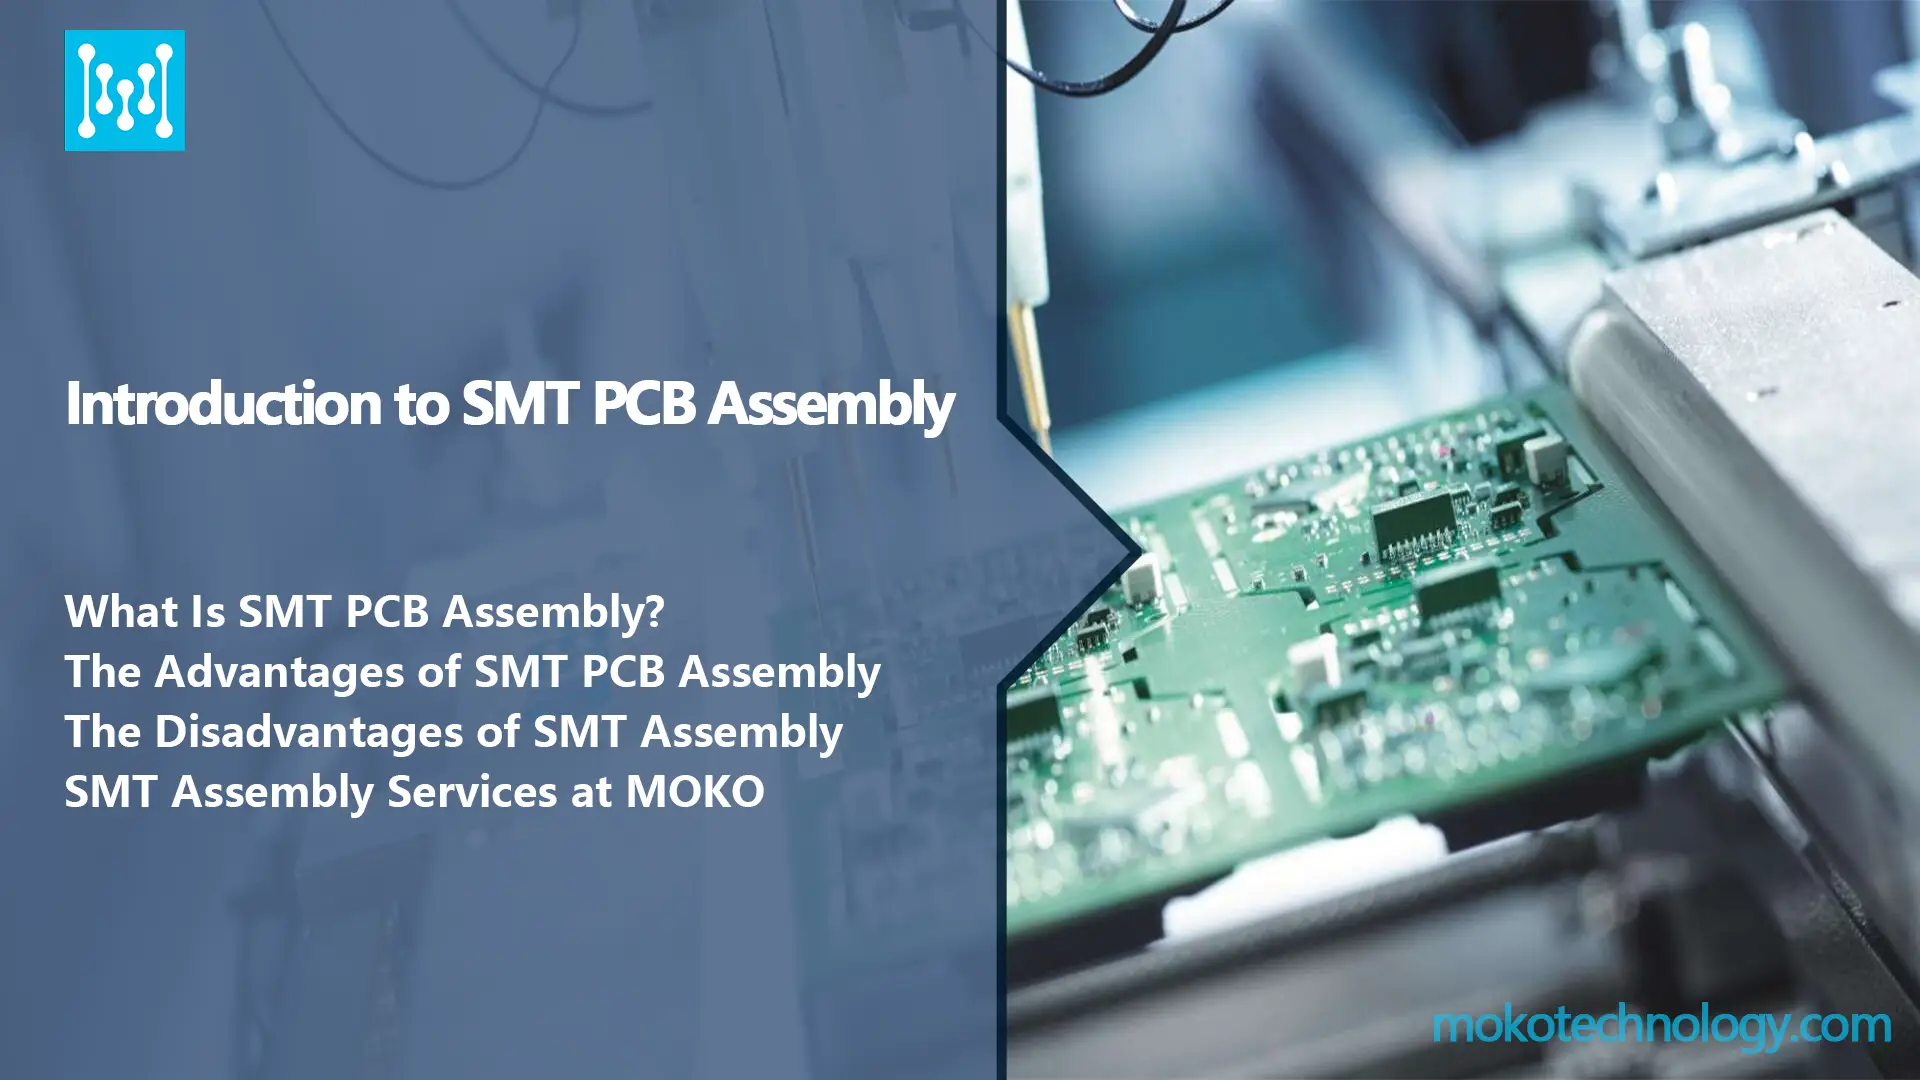 Introduction to SMT PCB Assembly